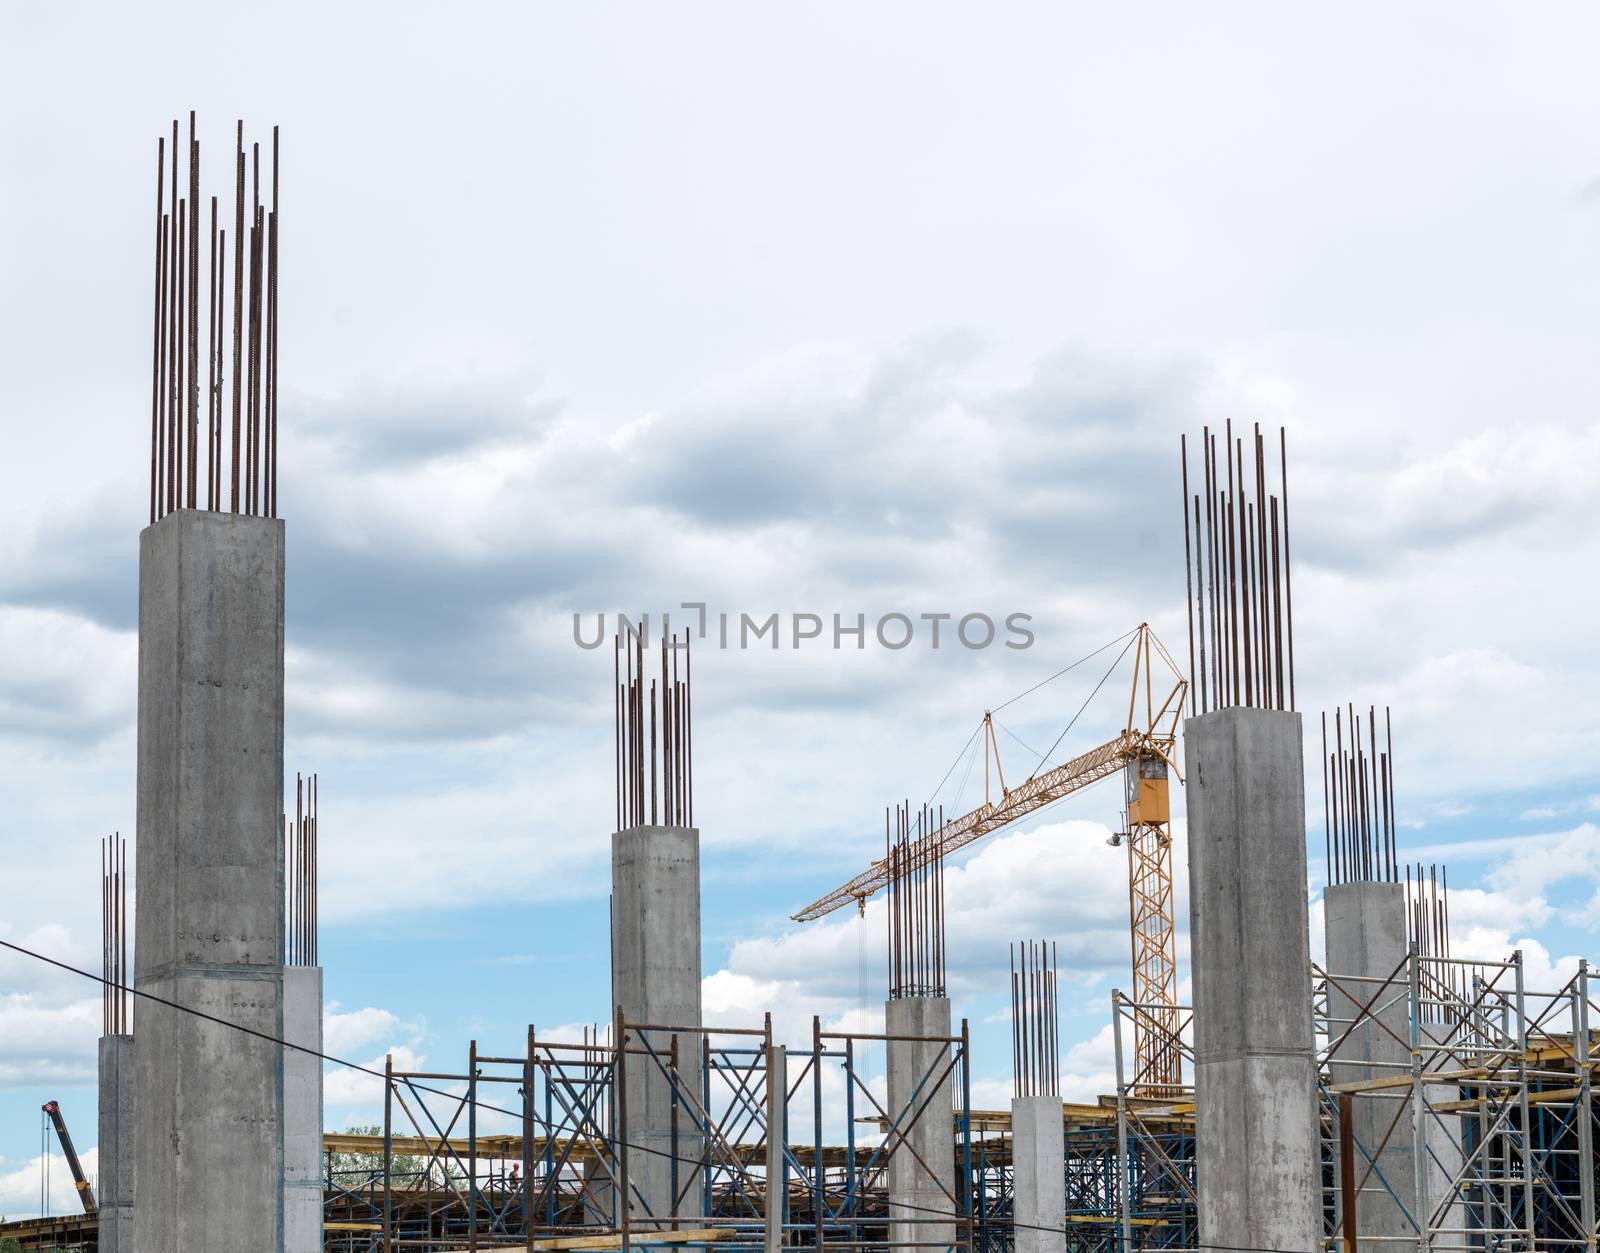 Reinforced concrete piles of the new building and tower crane behind them.